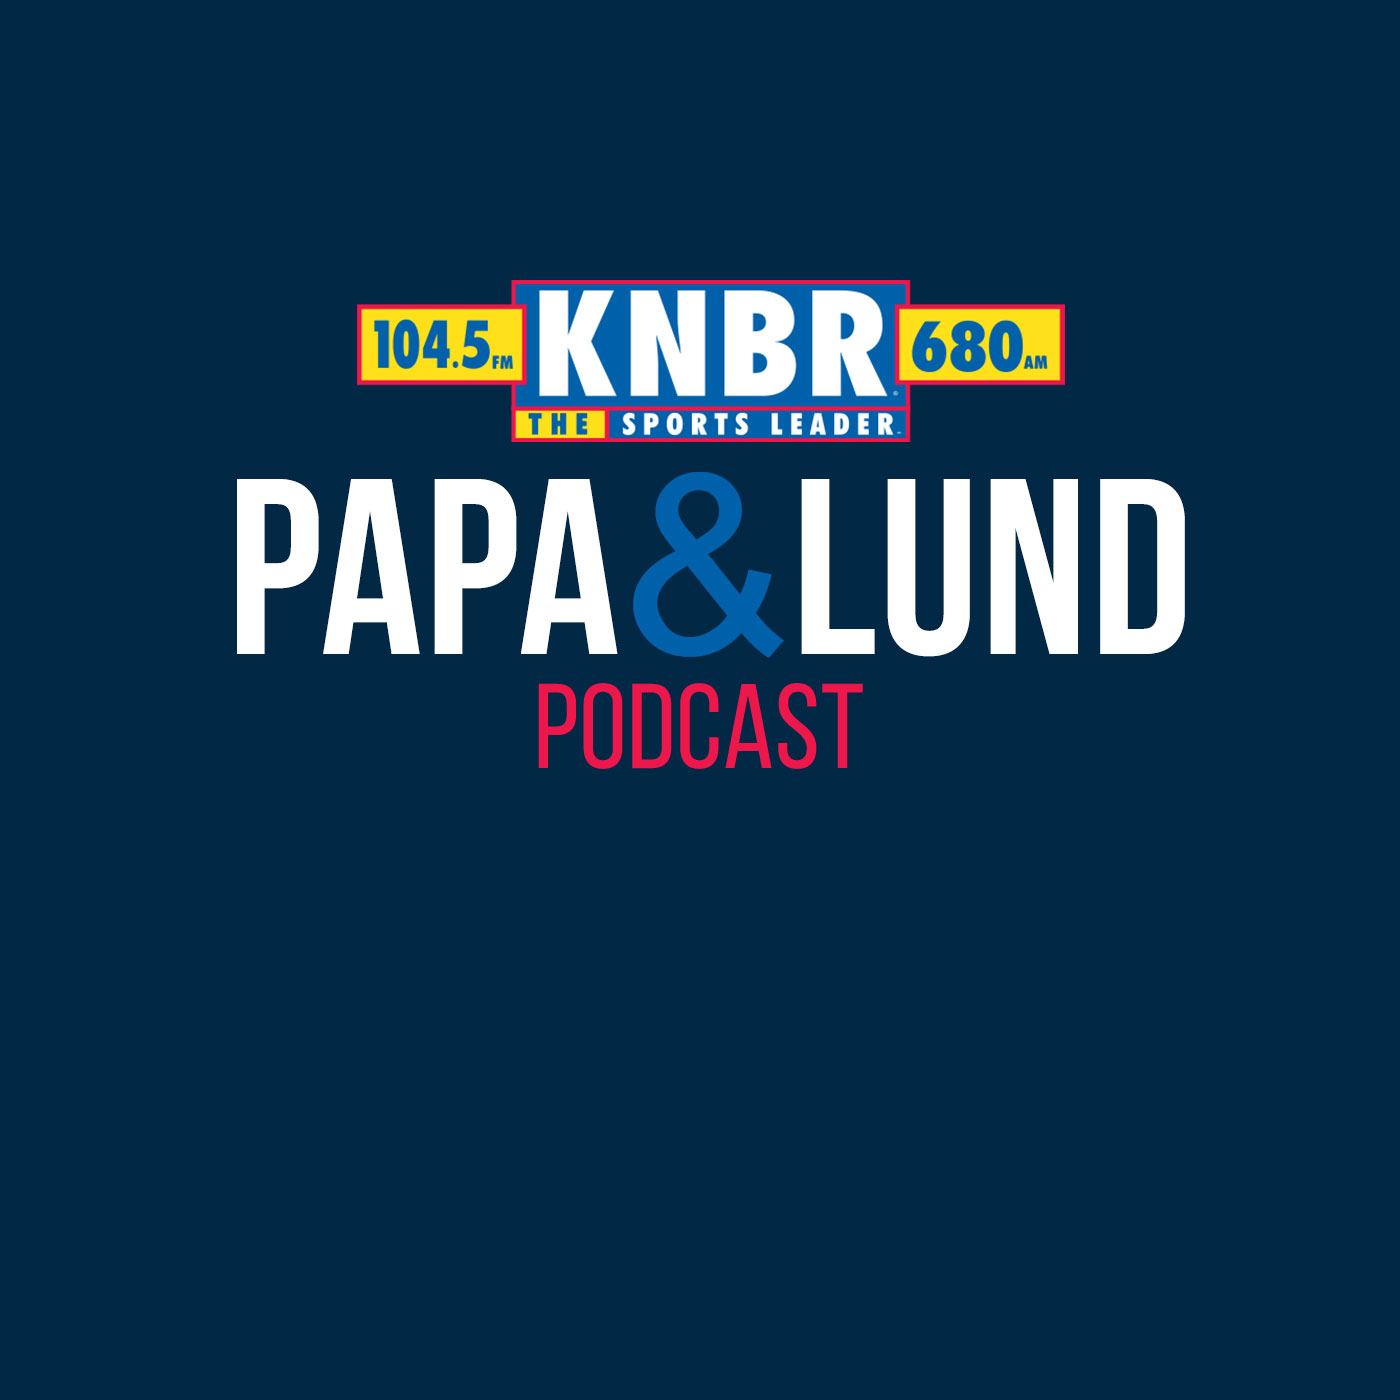 6-8 Jake Moody joins Papa & Lund to discuss being drafting by the 49ers and the amount of responsibility that comes with being drafted to a team with Super Bowl goals